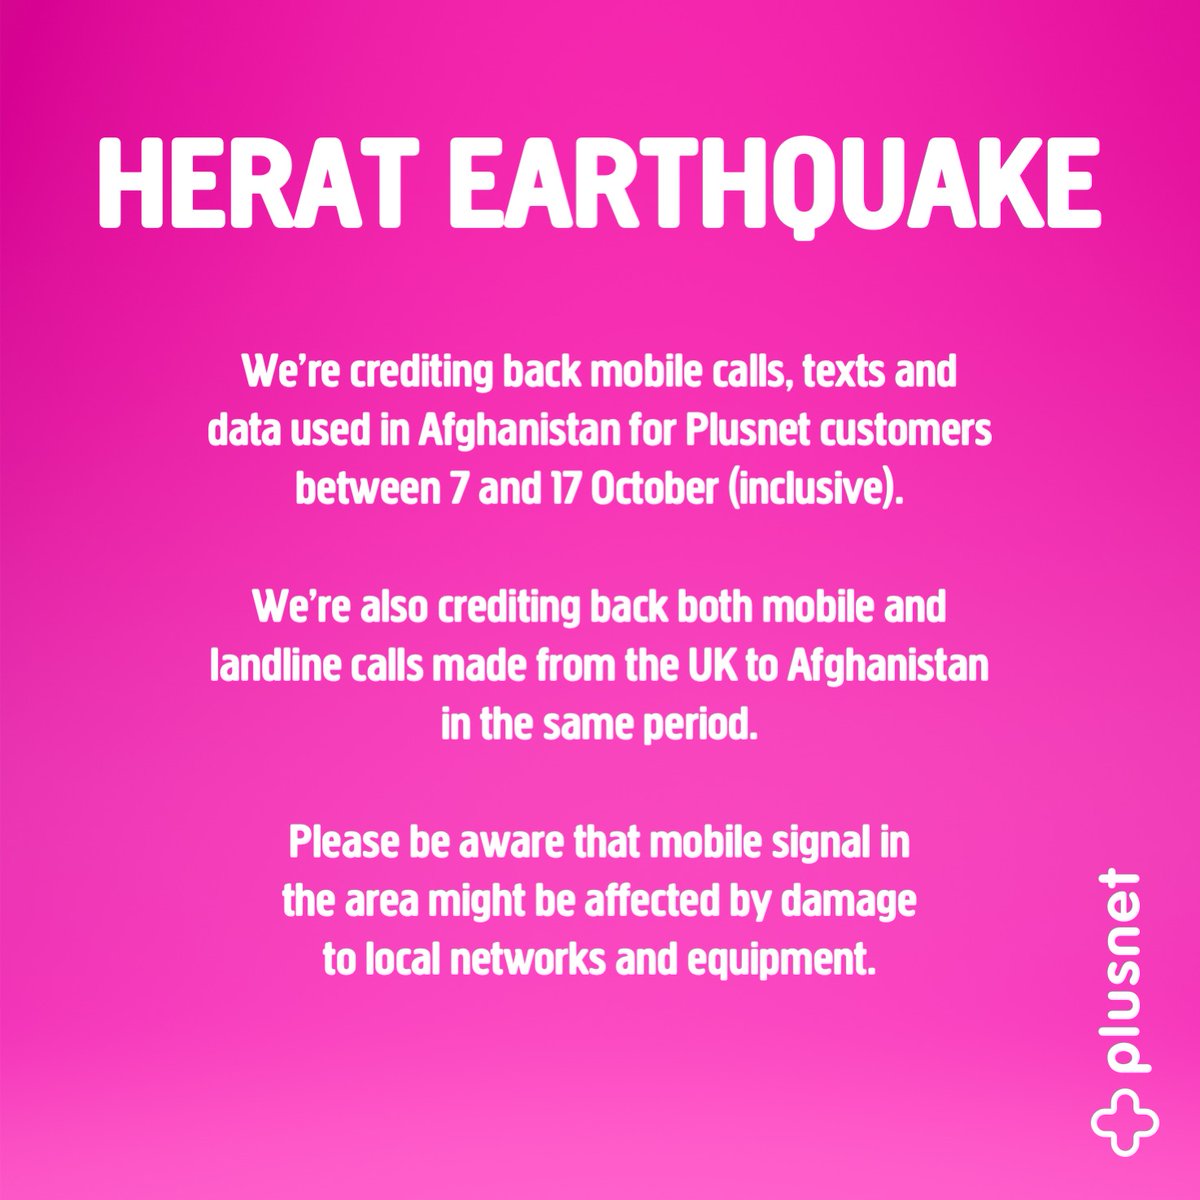 We’re crediting back mobile calls, texts and data used in Afghanistan for Plusnet customers between 7 and 17 October (inclusive). We’re also crediting back both mobile and landline calls made from the UK to Afghanistan. Mobile signal in the area might be affected by damage.